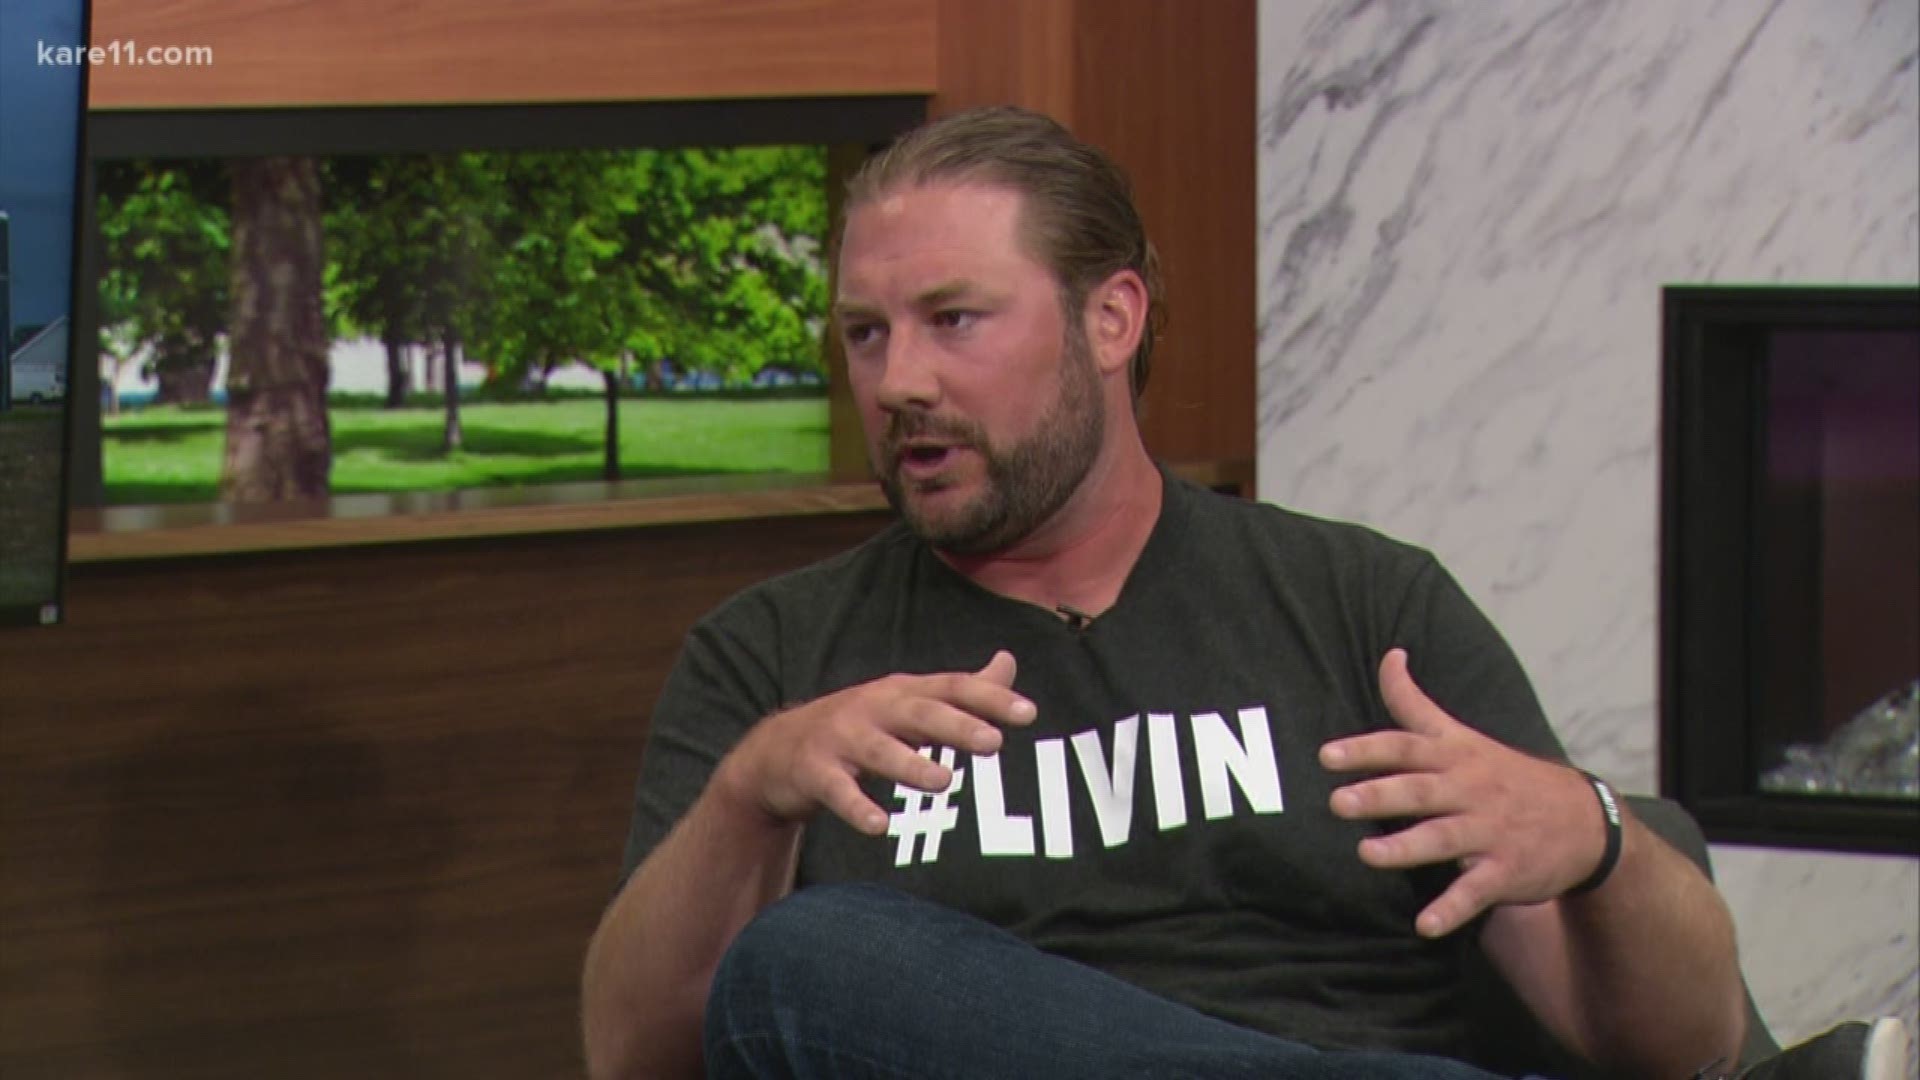 The 1st Annual Get Busy #LIVIN Music Festival in Elk River will take place on Saturday, Sept. 22 and will benefit the #LIVIN Foundation, which raises awareness about depression/mental health issues in the hopes of preventing suicide. http://www.kare11.com